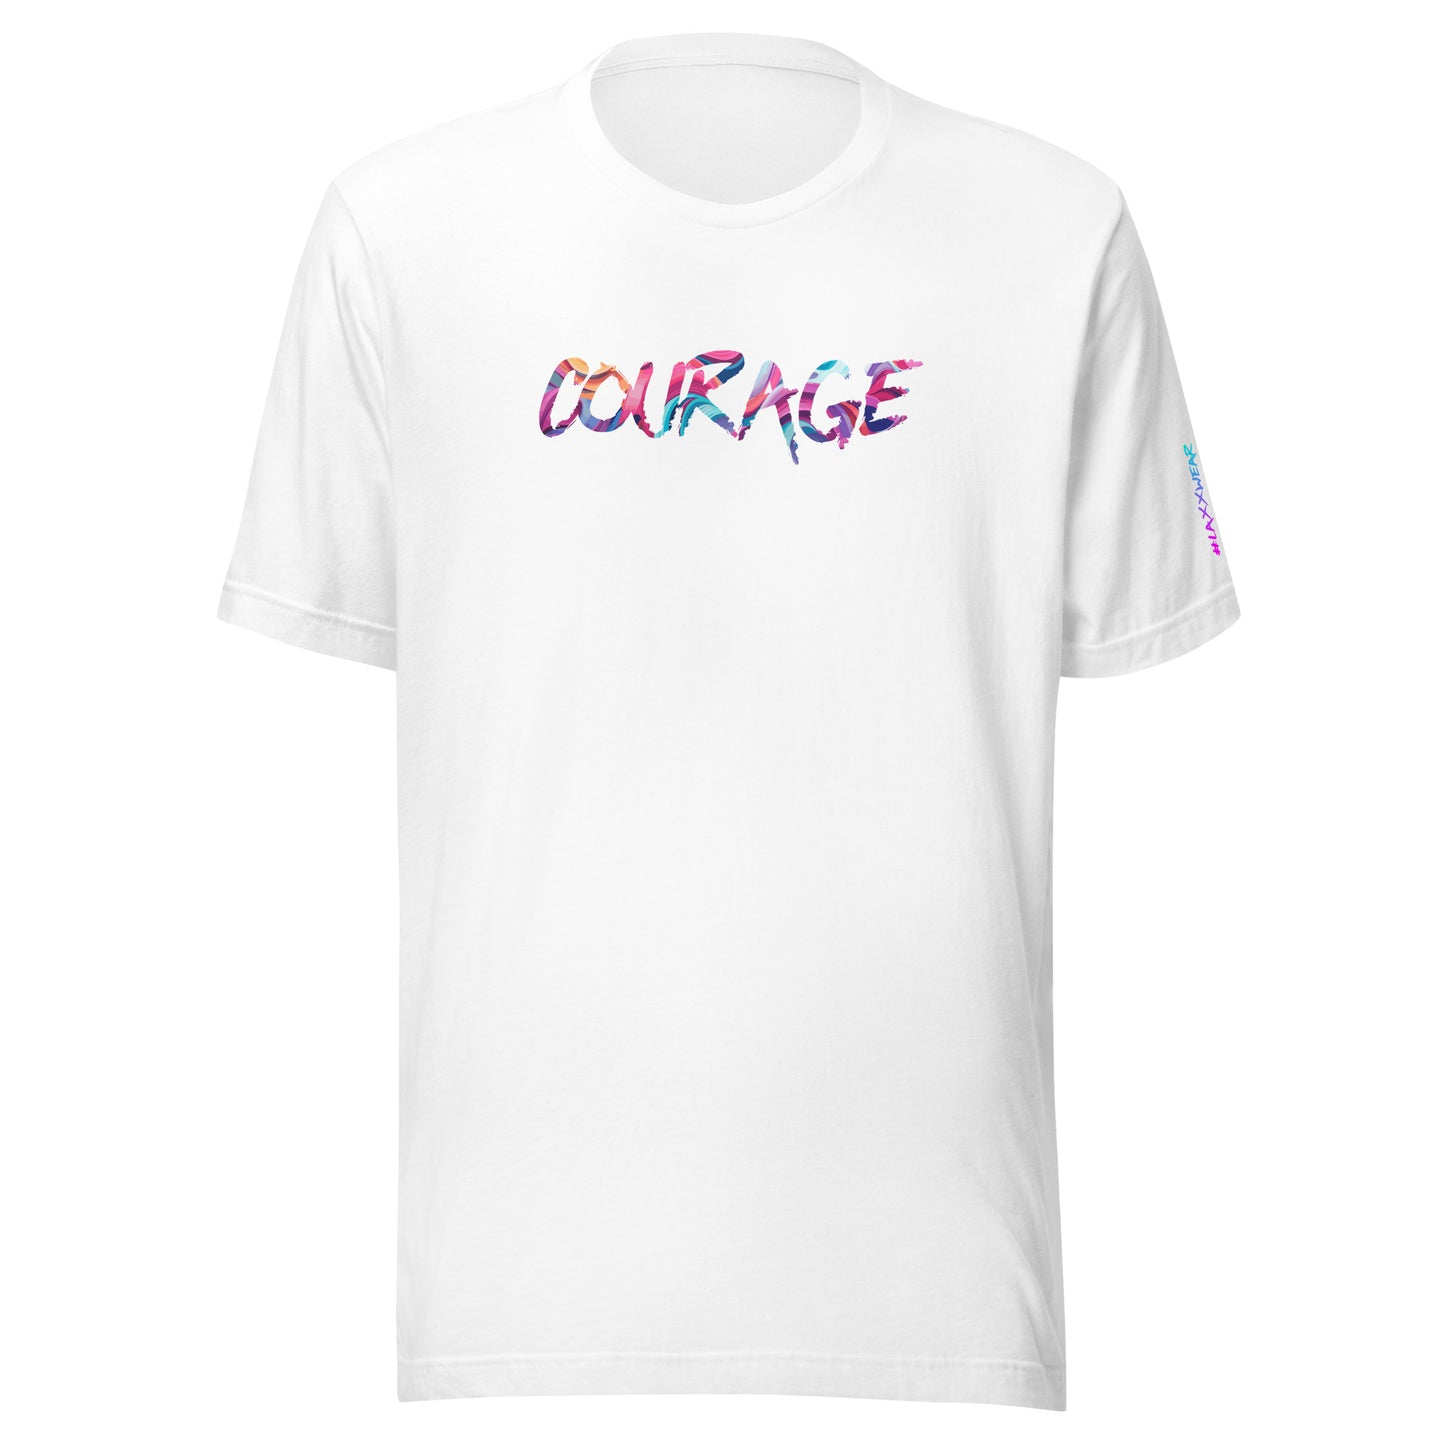 "Words of Encouragement" T-Shirt - Courage Q323